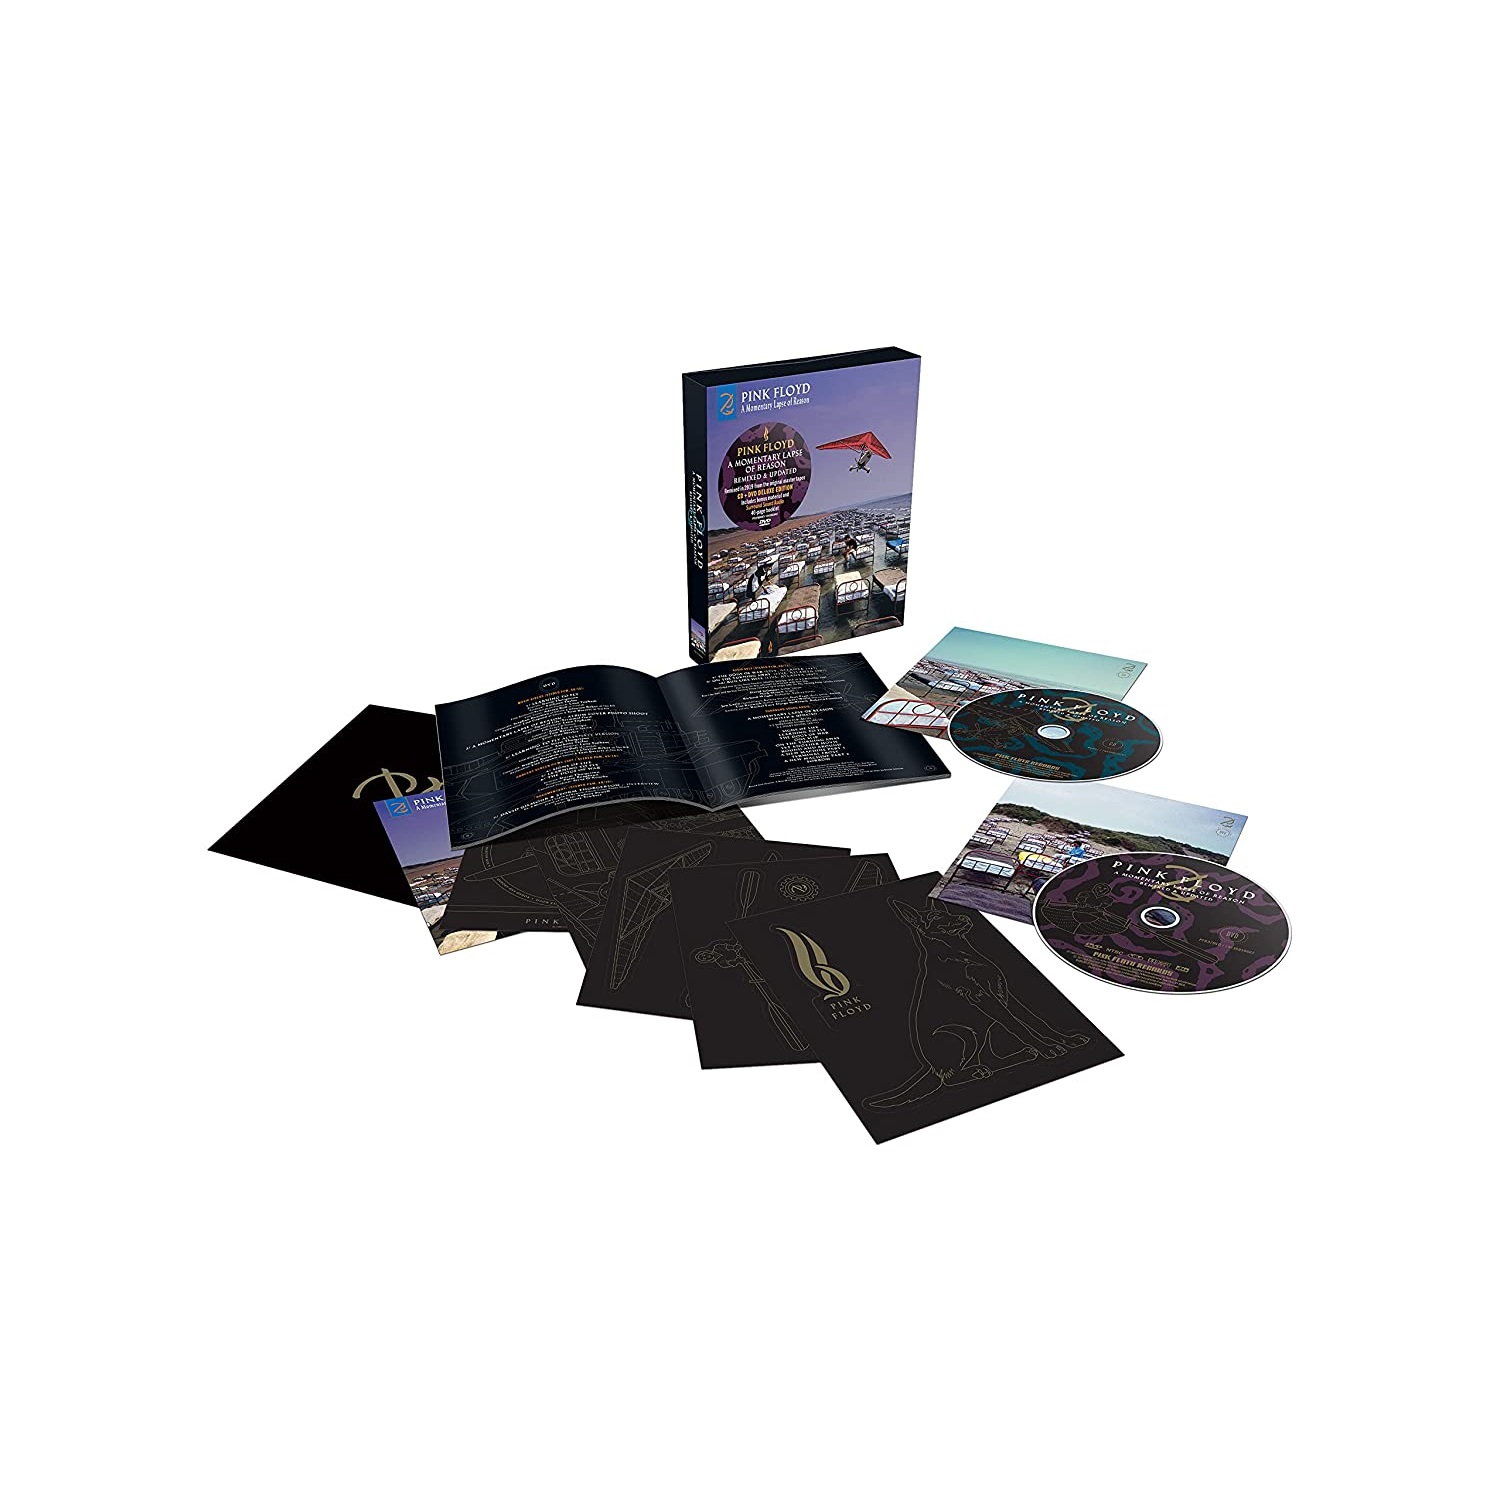 Pink Floyd (핑크 플로이드) - A Momentary Lapse Of Reason Remixed & Updated [CD+DVD] 